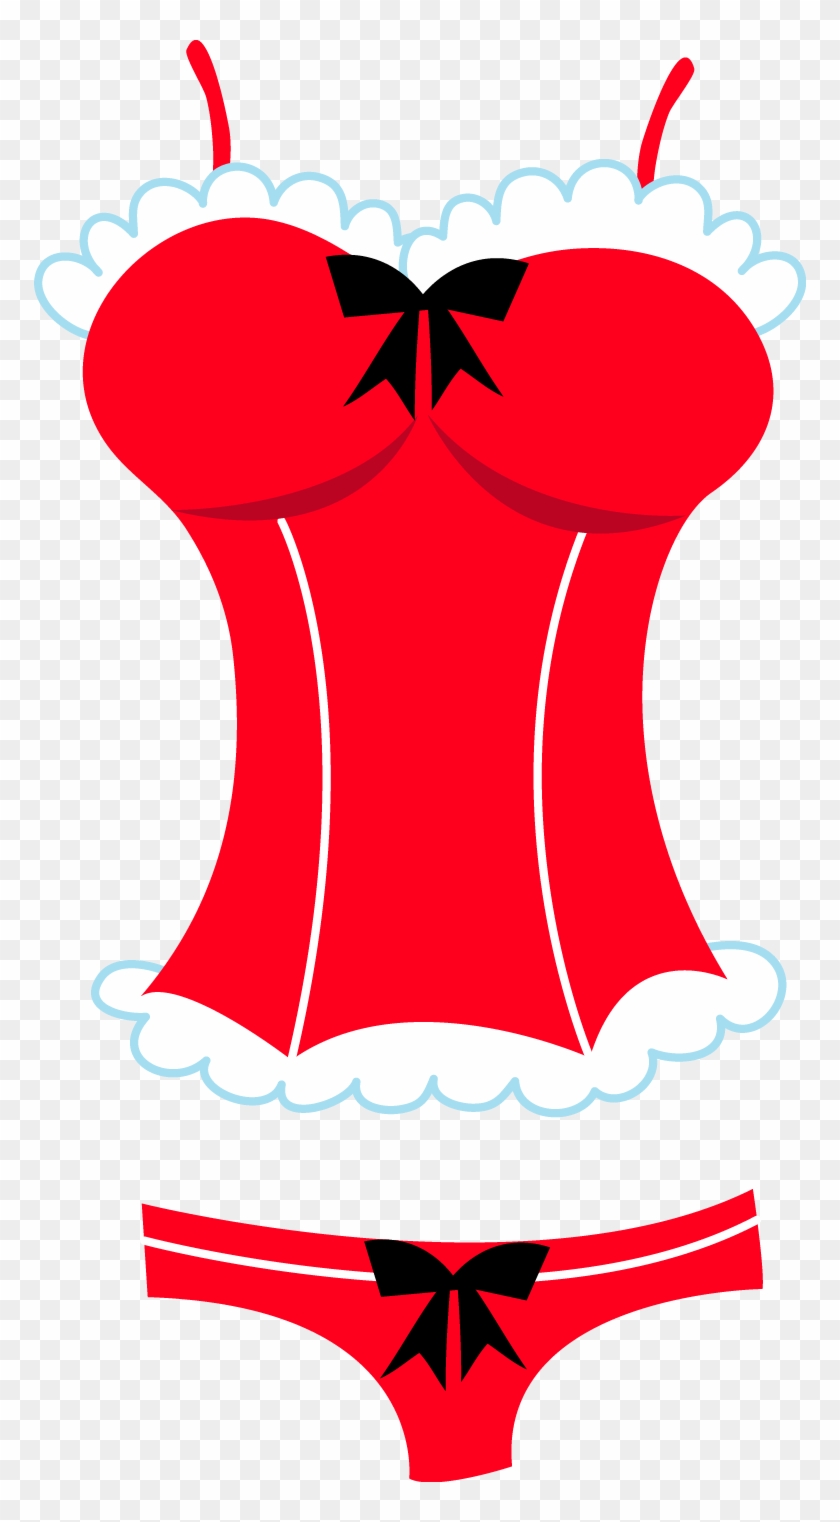 Lingerie Inspired In Santa Images Oh My Fiesta For - Chá De Lingerie  Vermelho Png - Free Transparent PNG Clipart Images Download